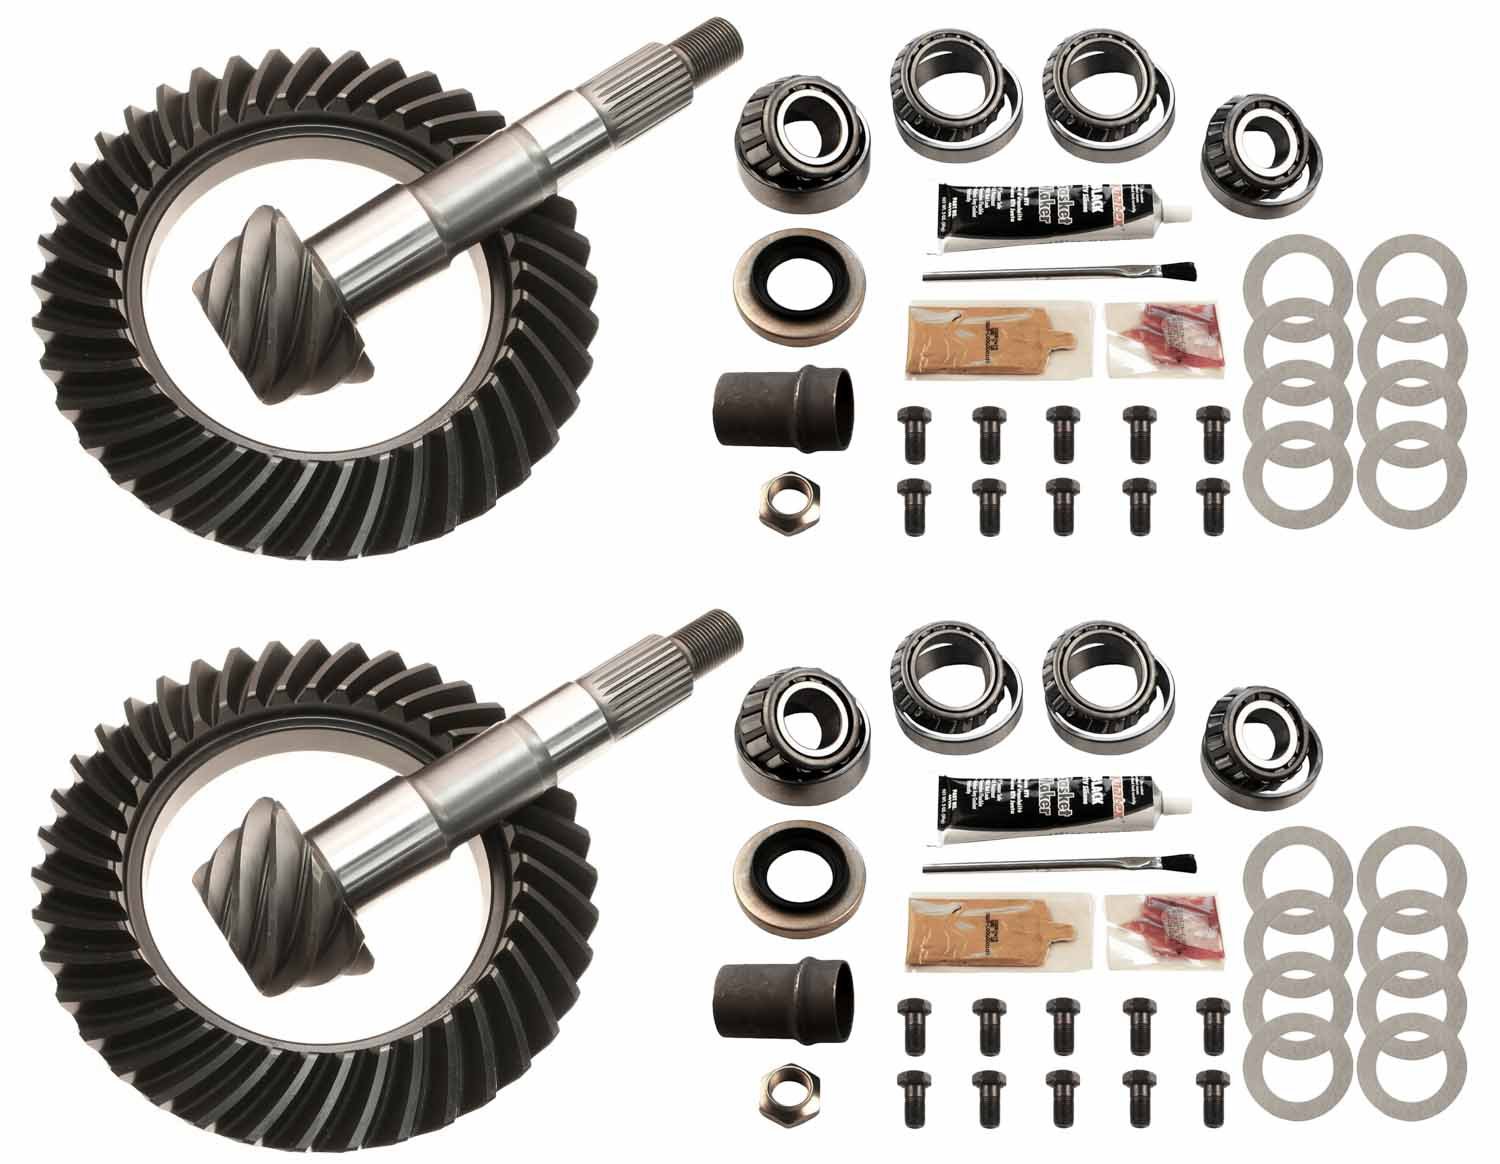 Complete Front and Rear Ring and Pinion Kit 1979-1985 Toyota Pickup 4-Cylinder, 1984-1985 Toyota 4Runner 4-Cylinder - 4.88 Ratio